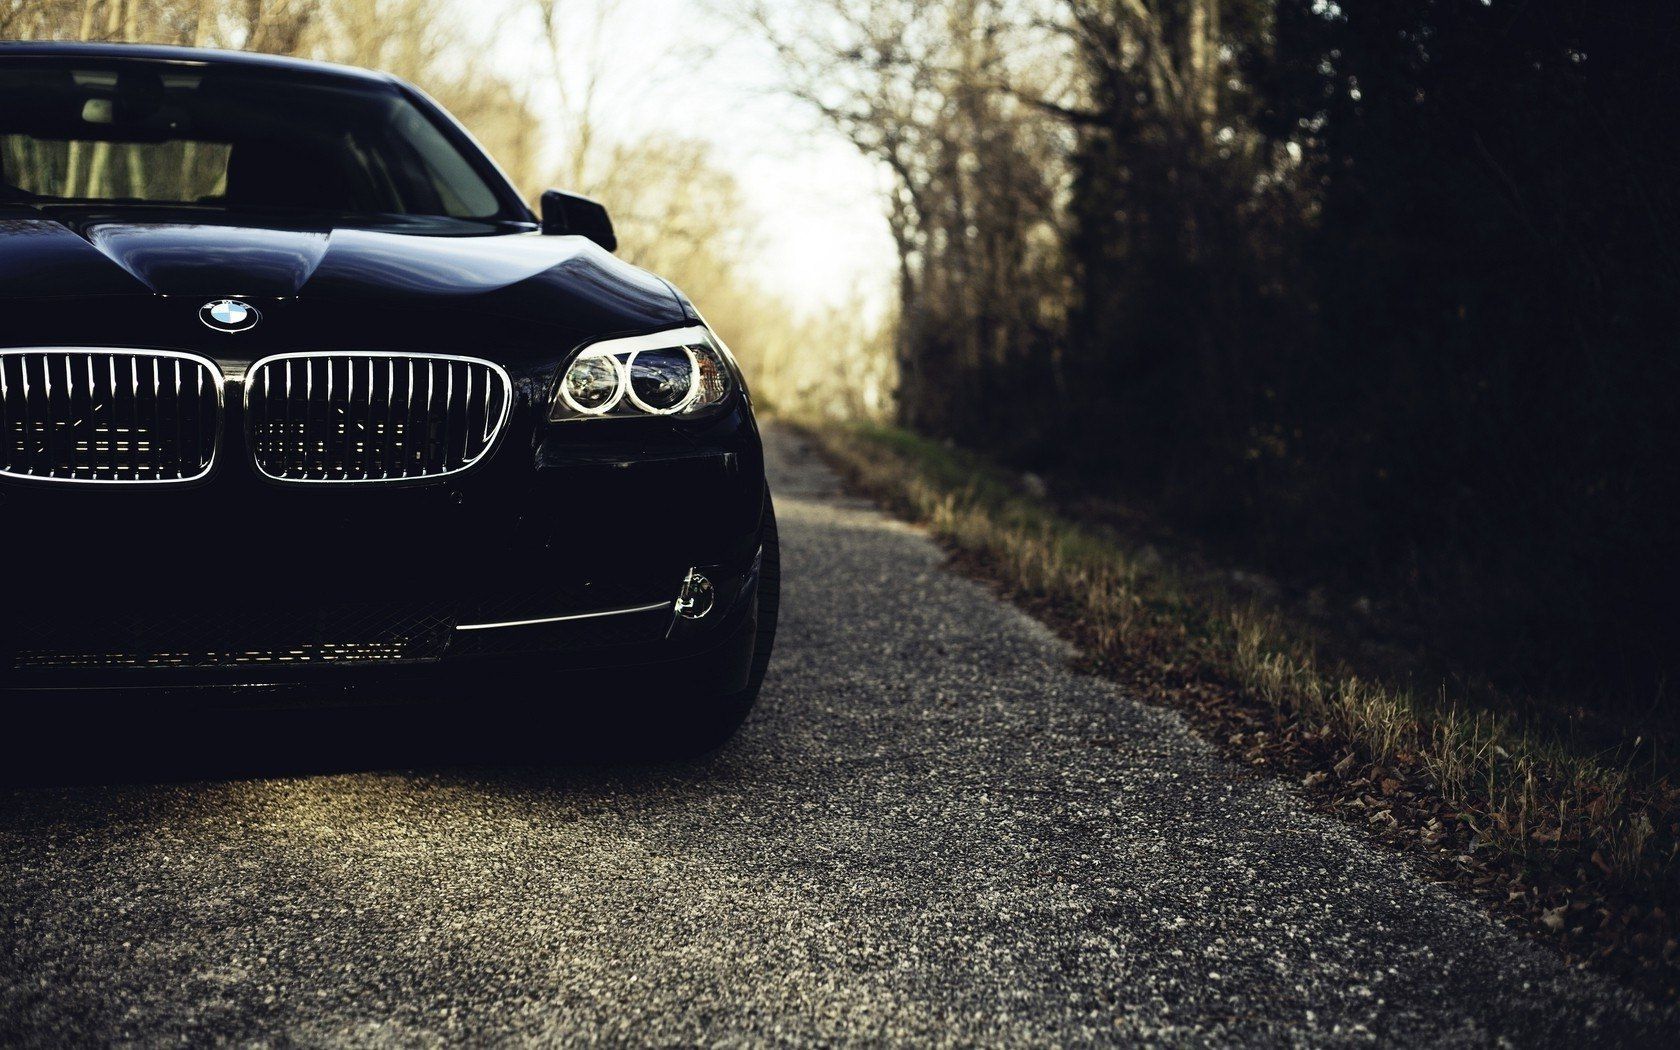 Bmw wallpaper 1680x1050 - High Quality and Resolution